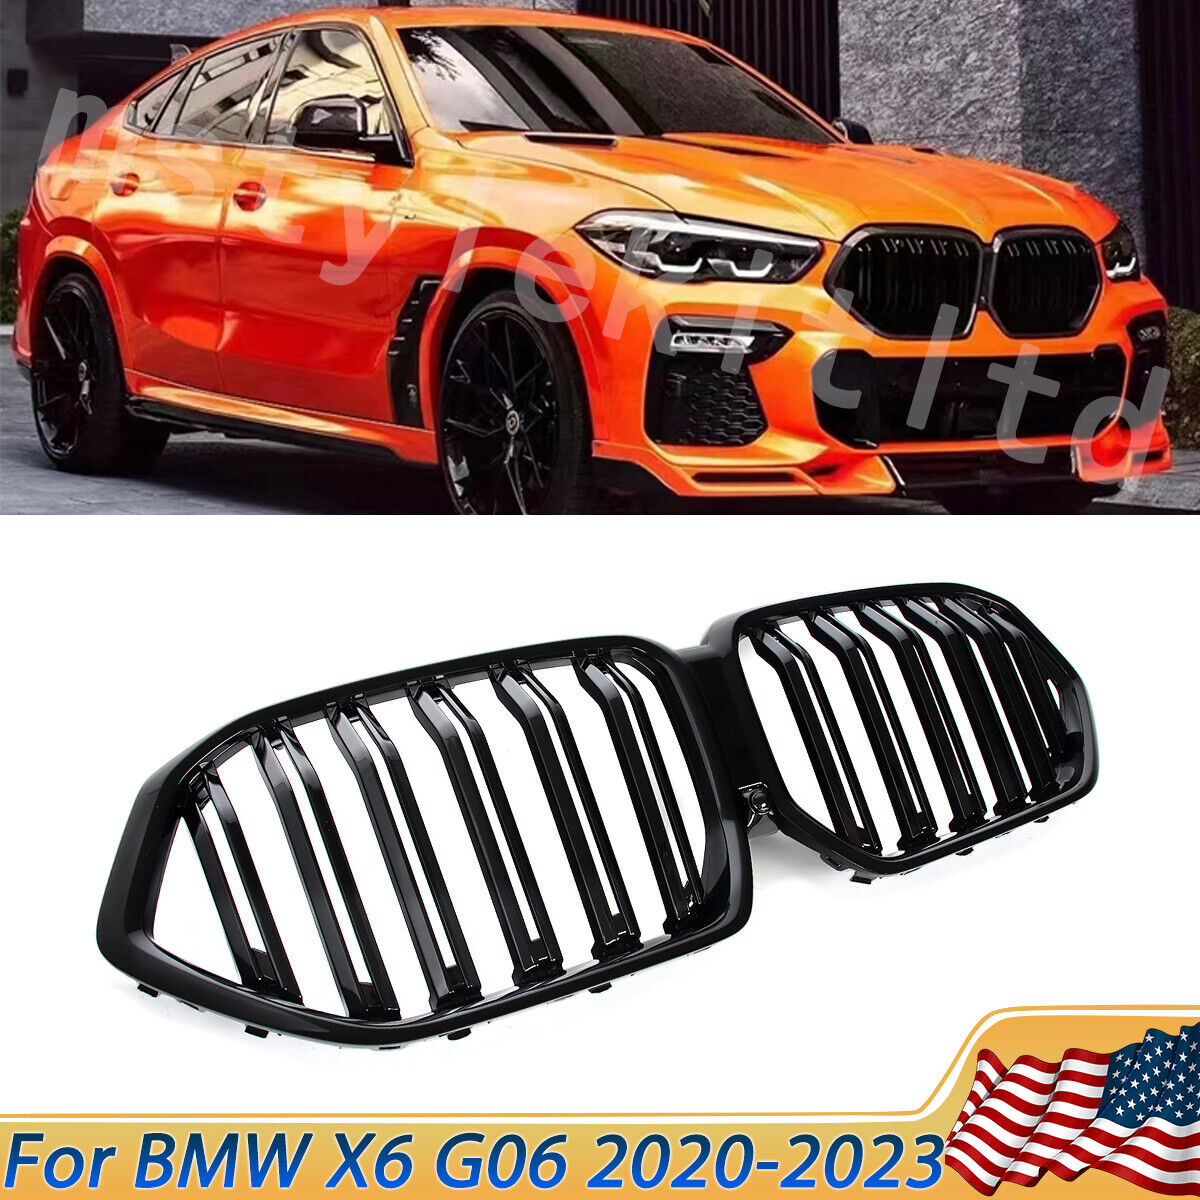 For BMW X6 G06 2020-2023 Dual Line Gloss Black Car Front Kidney Grille Grill